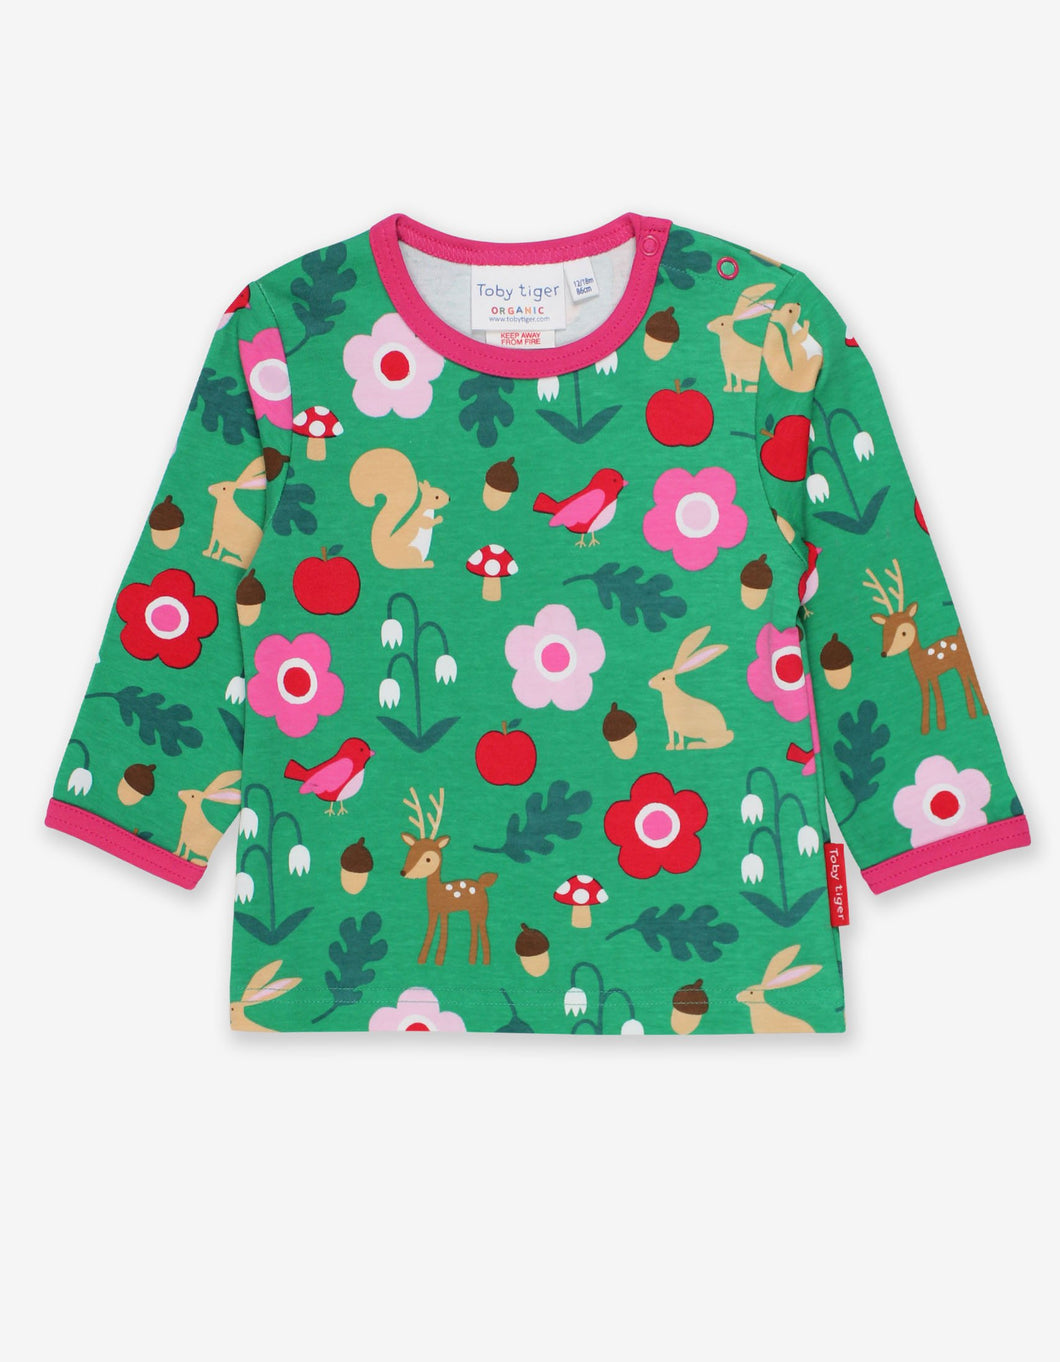 Long-sleeved shirt with forest print made from organic cotton